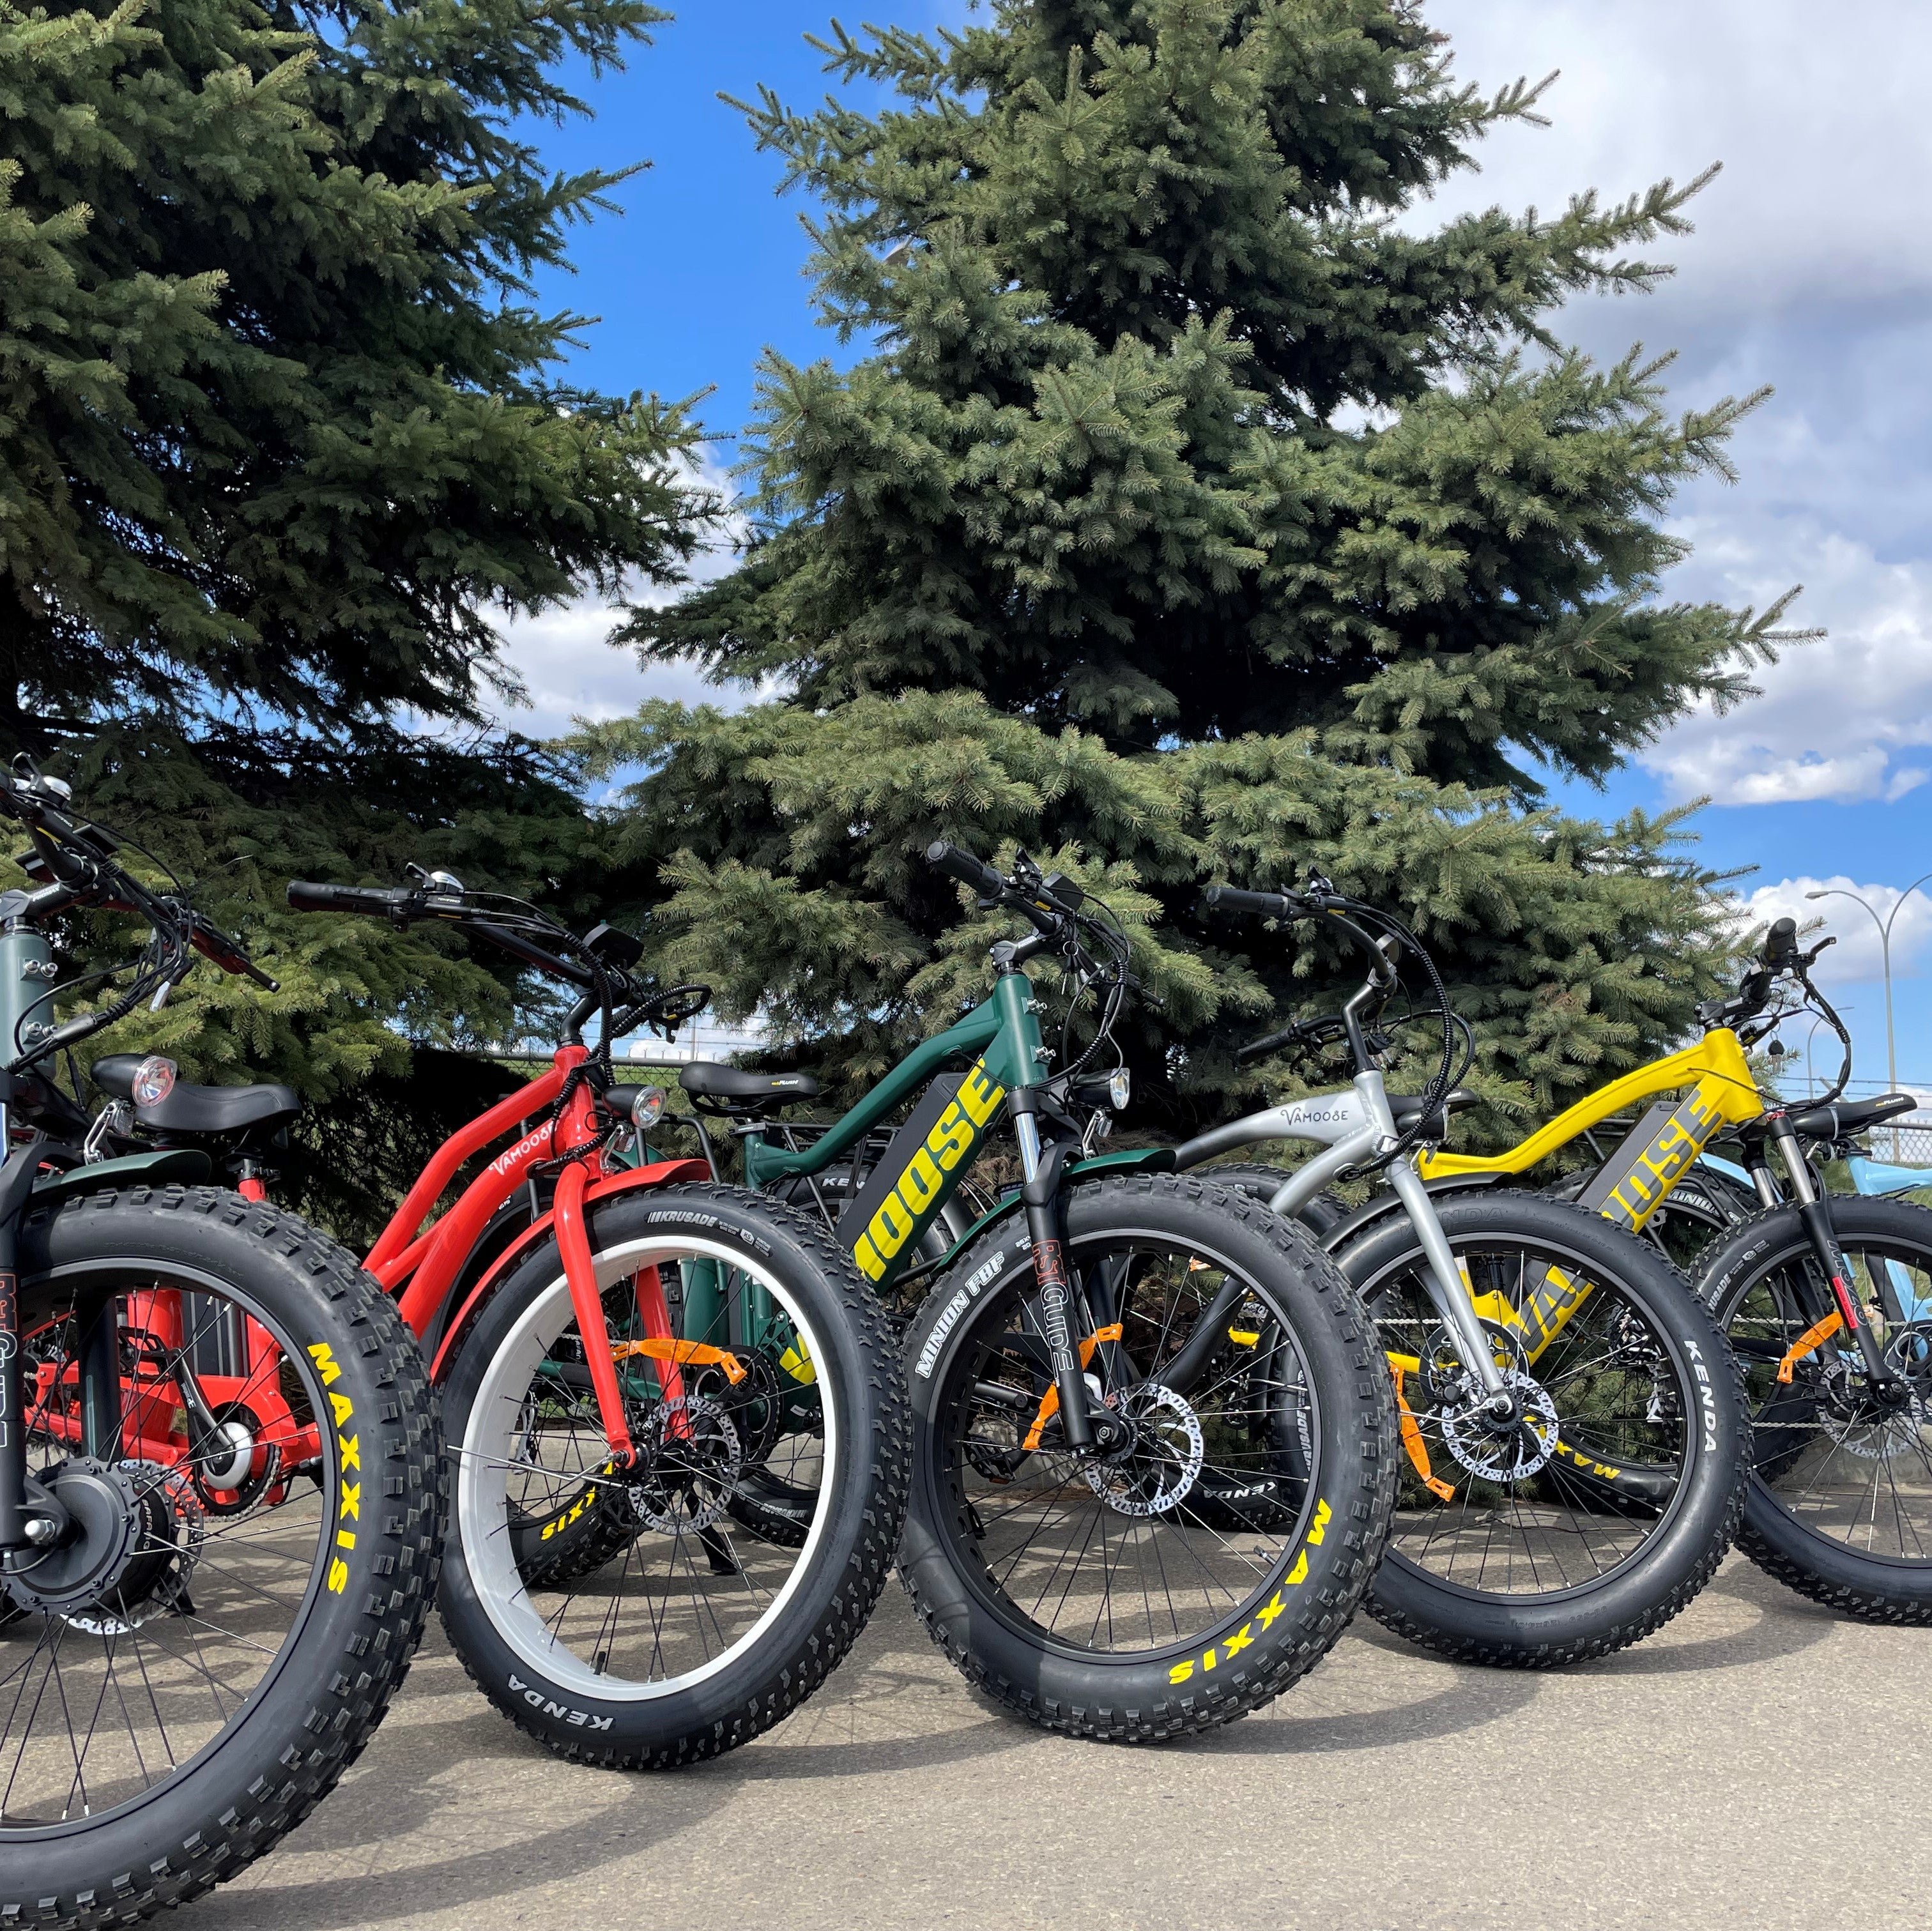 Best Electric Bike: How to Pick the Best Ebike for Your Lifestyle